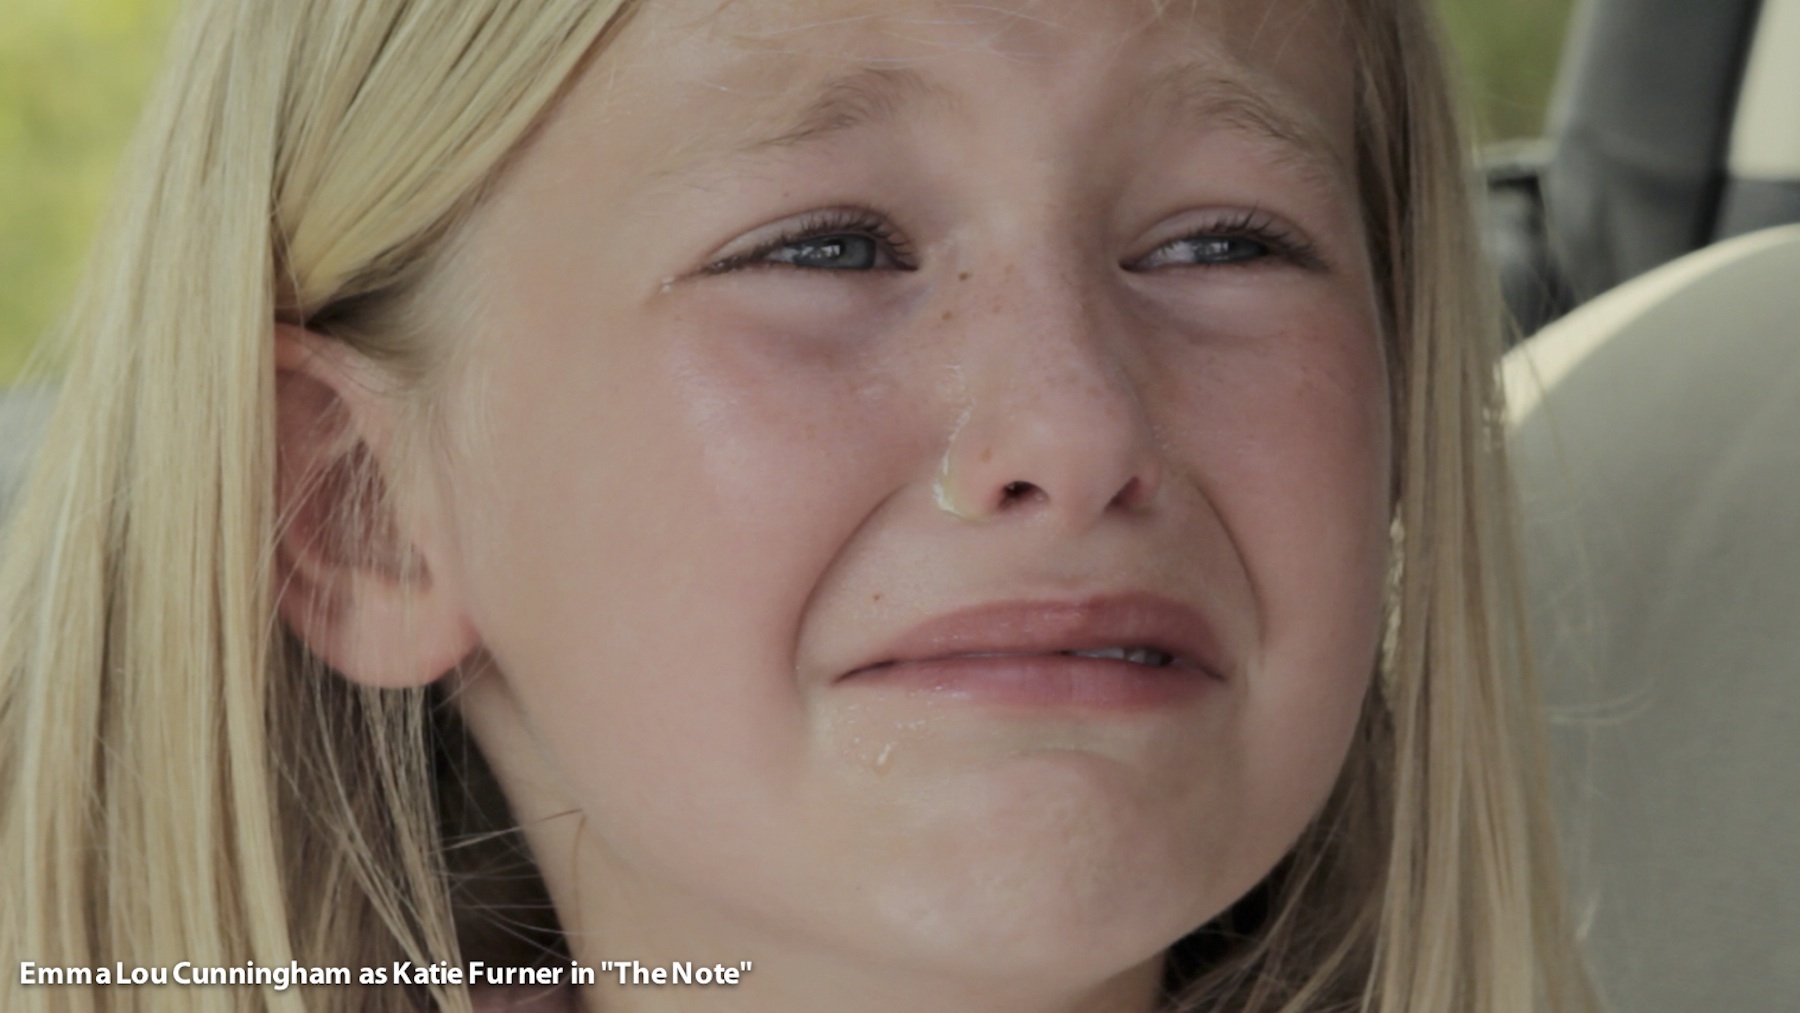 Screenshot from Emma's emotional scene as Katie Furner in The Note.